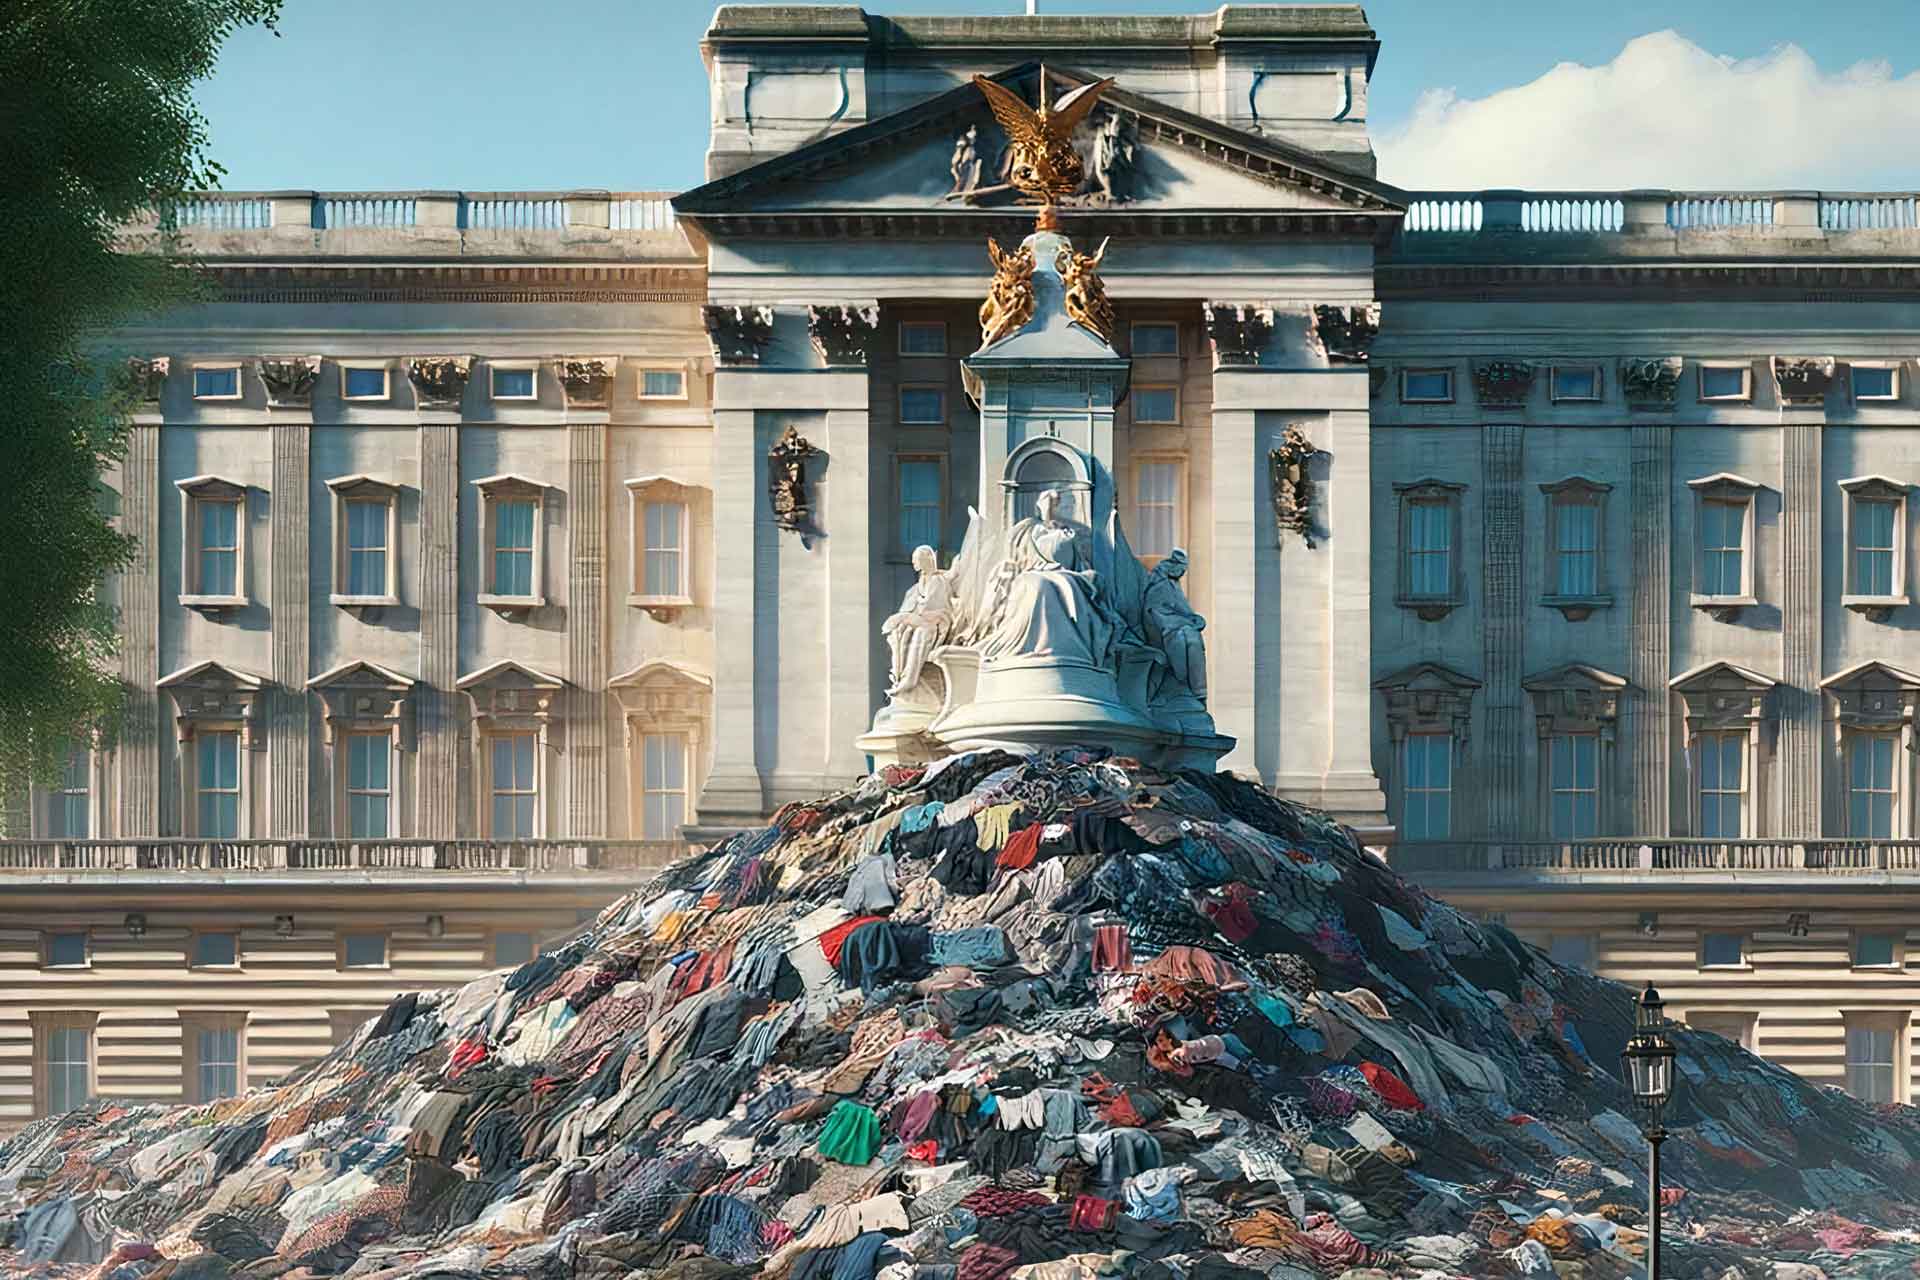 AI image of fashion waste piled up in front of Buckingham Palace